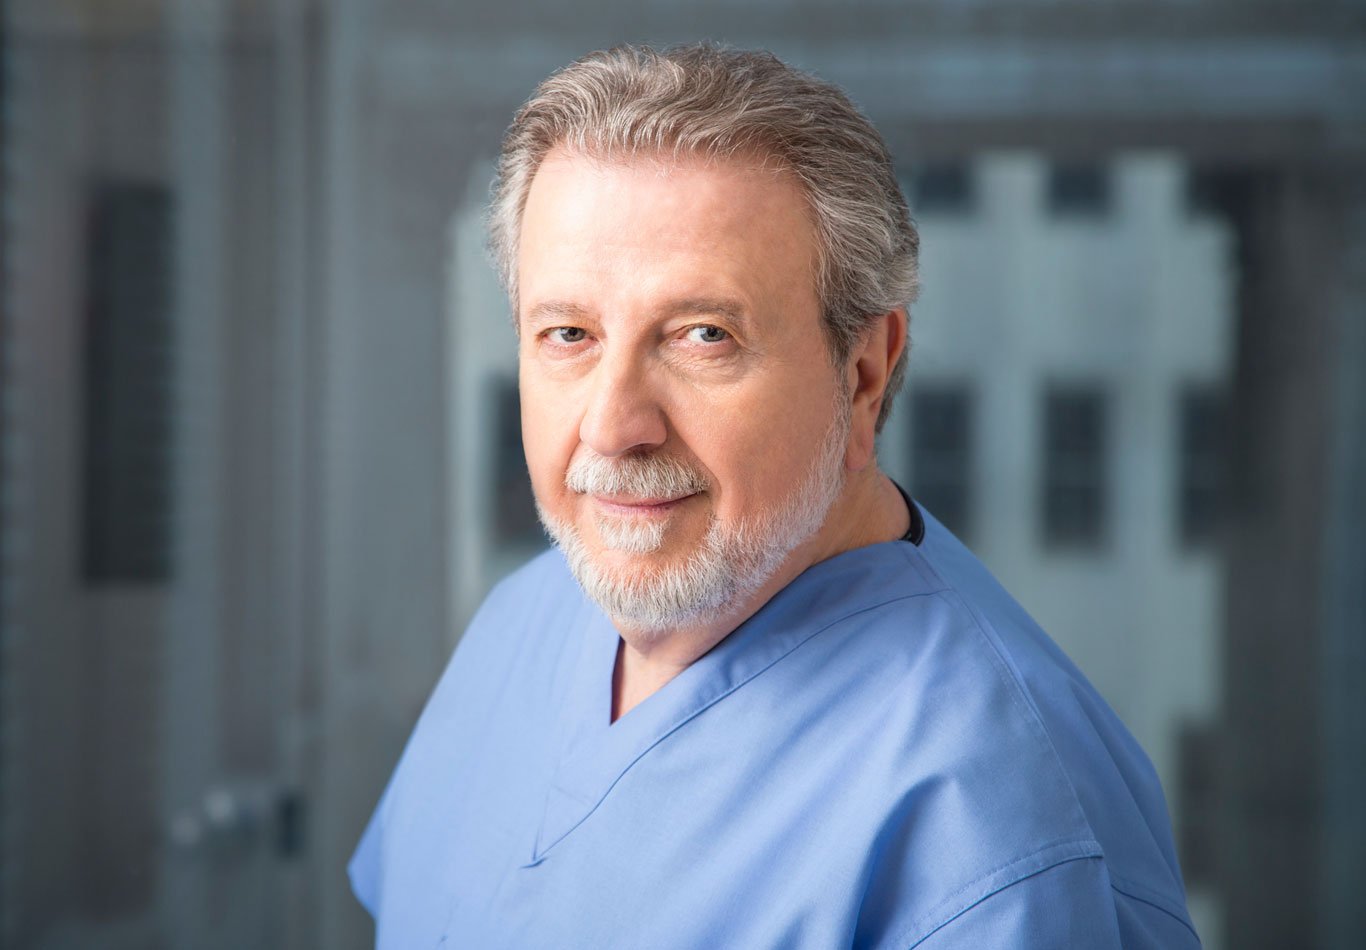 George Kofinas is an expert in egg freezing and IVF procedures